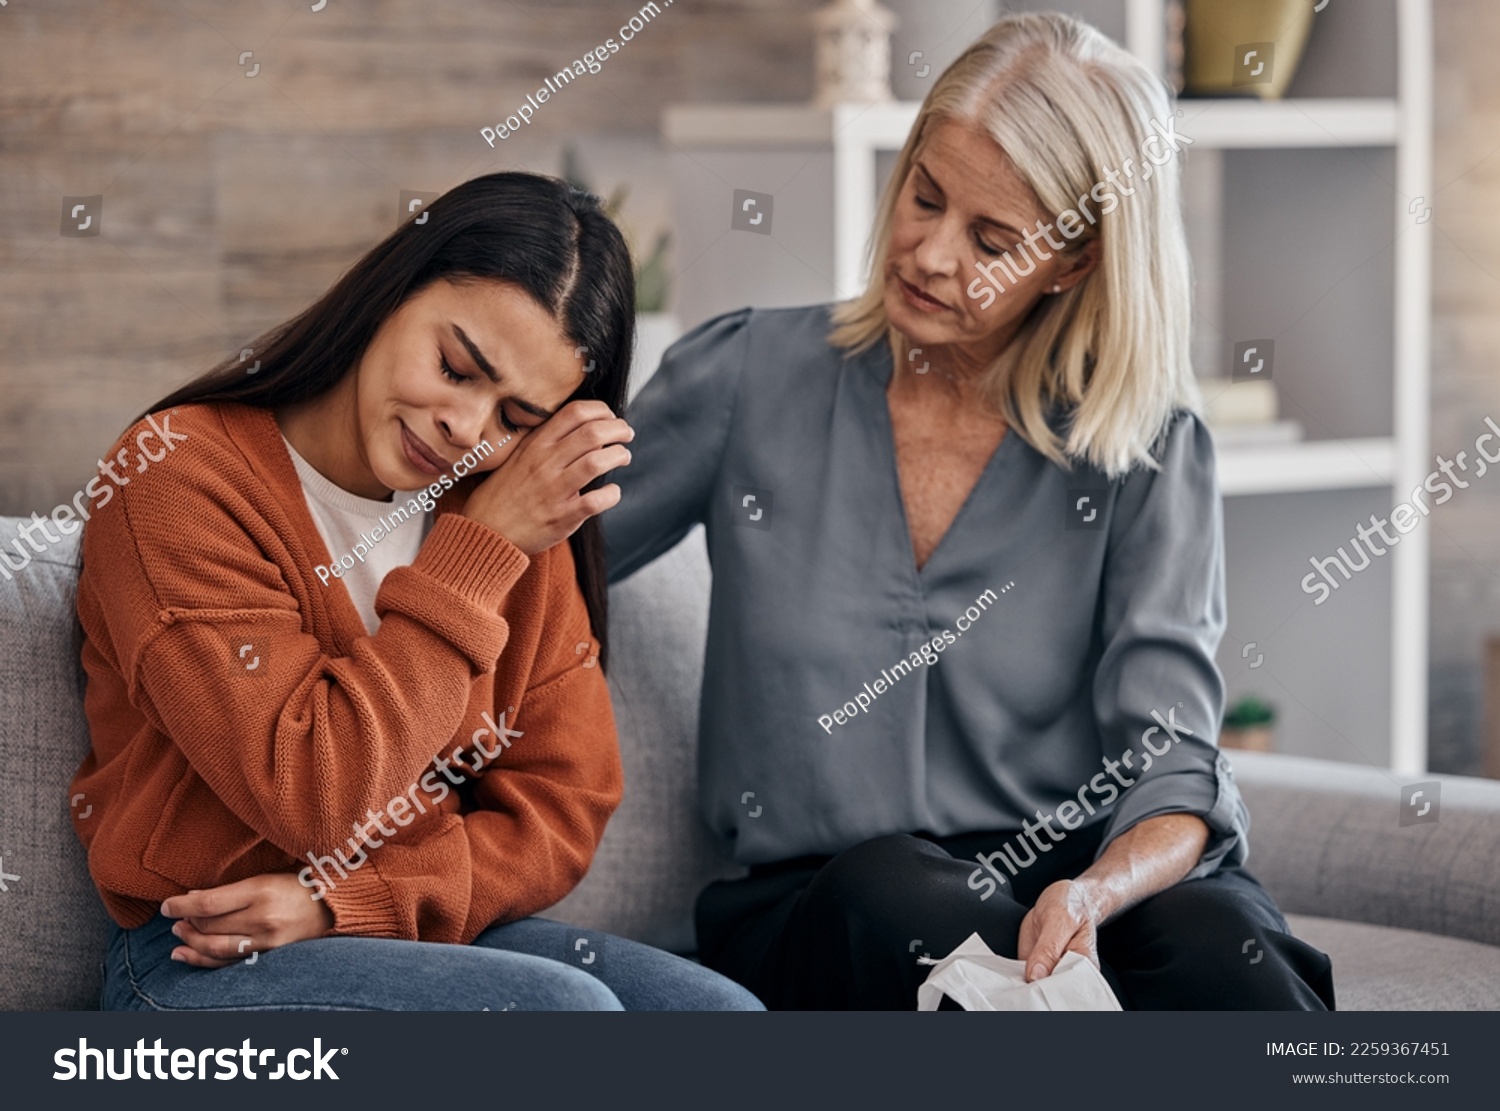 Sad woman, therapist and care for understanding in support for addiction, mental health or counseling. Female counselor or shrink helping crying patient in healthcare, therapy session or meeting #2259367451